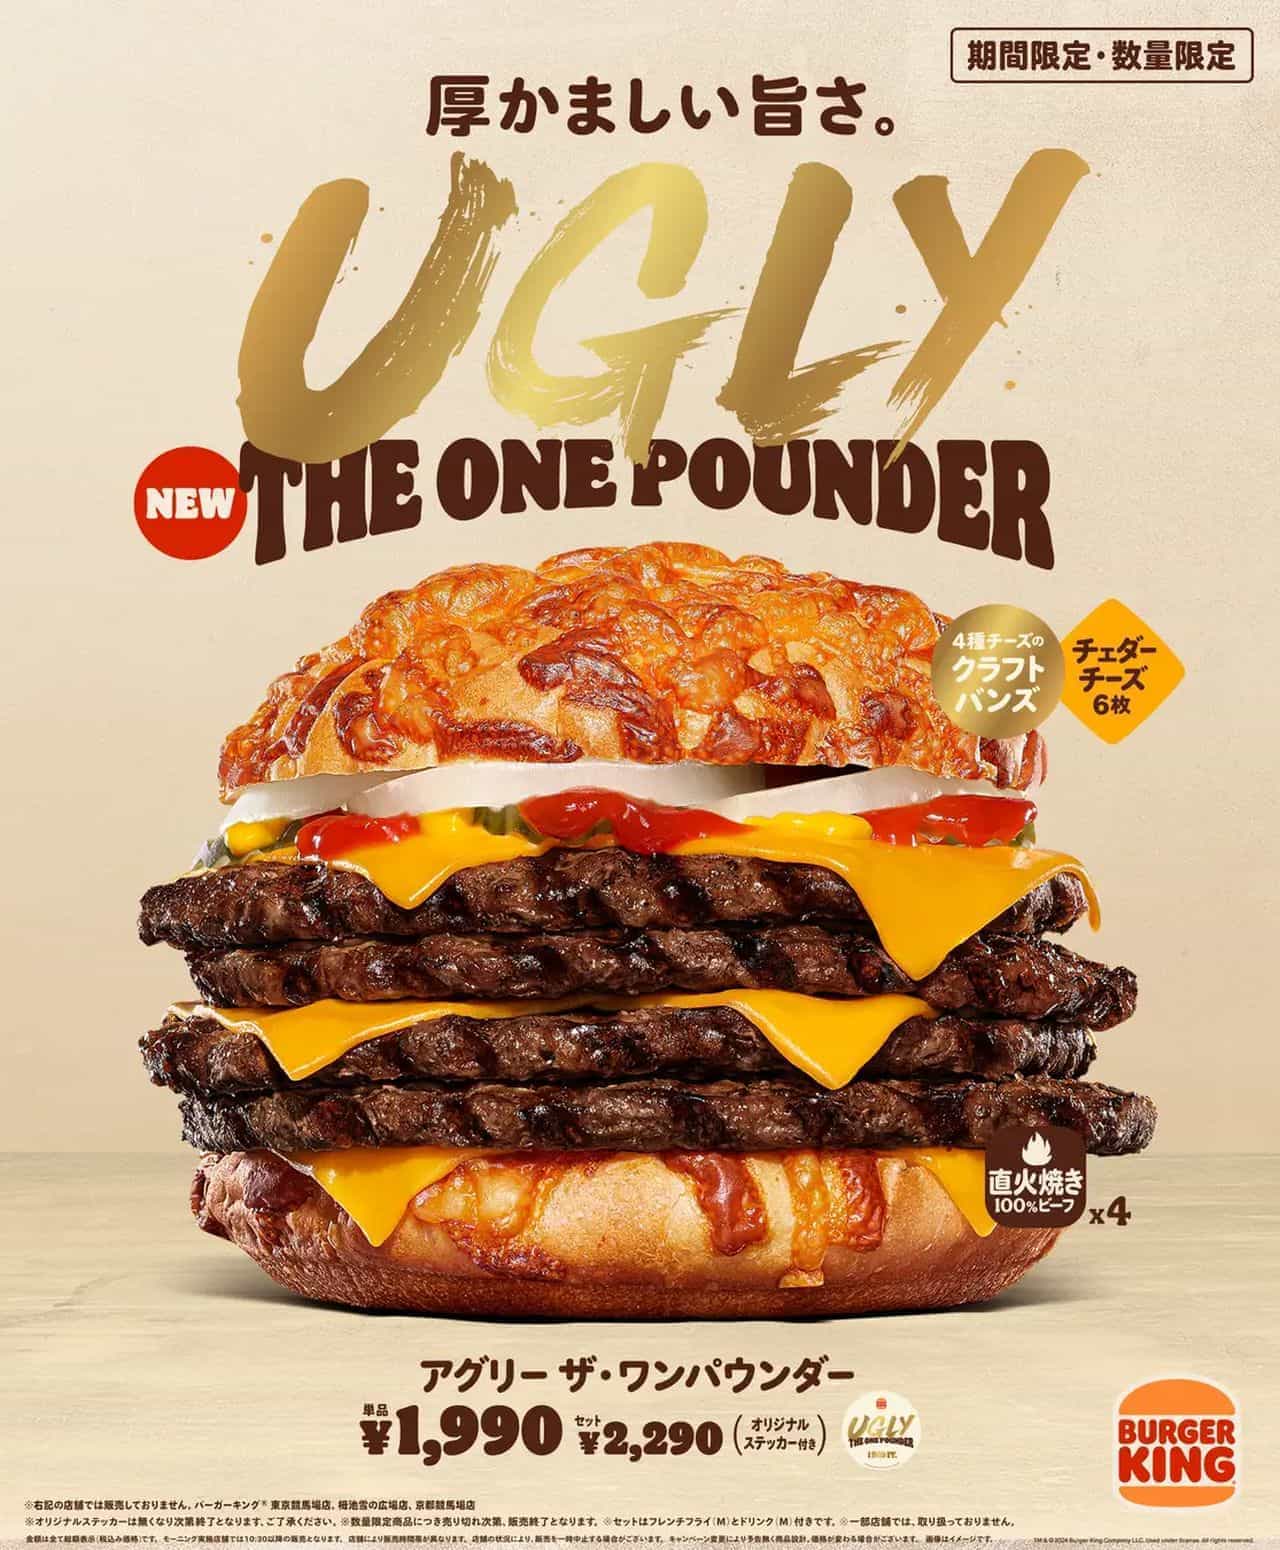 Burger King "Ugly the One Pounder"